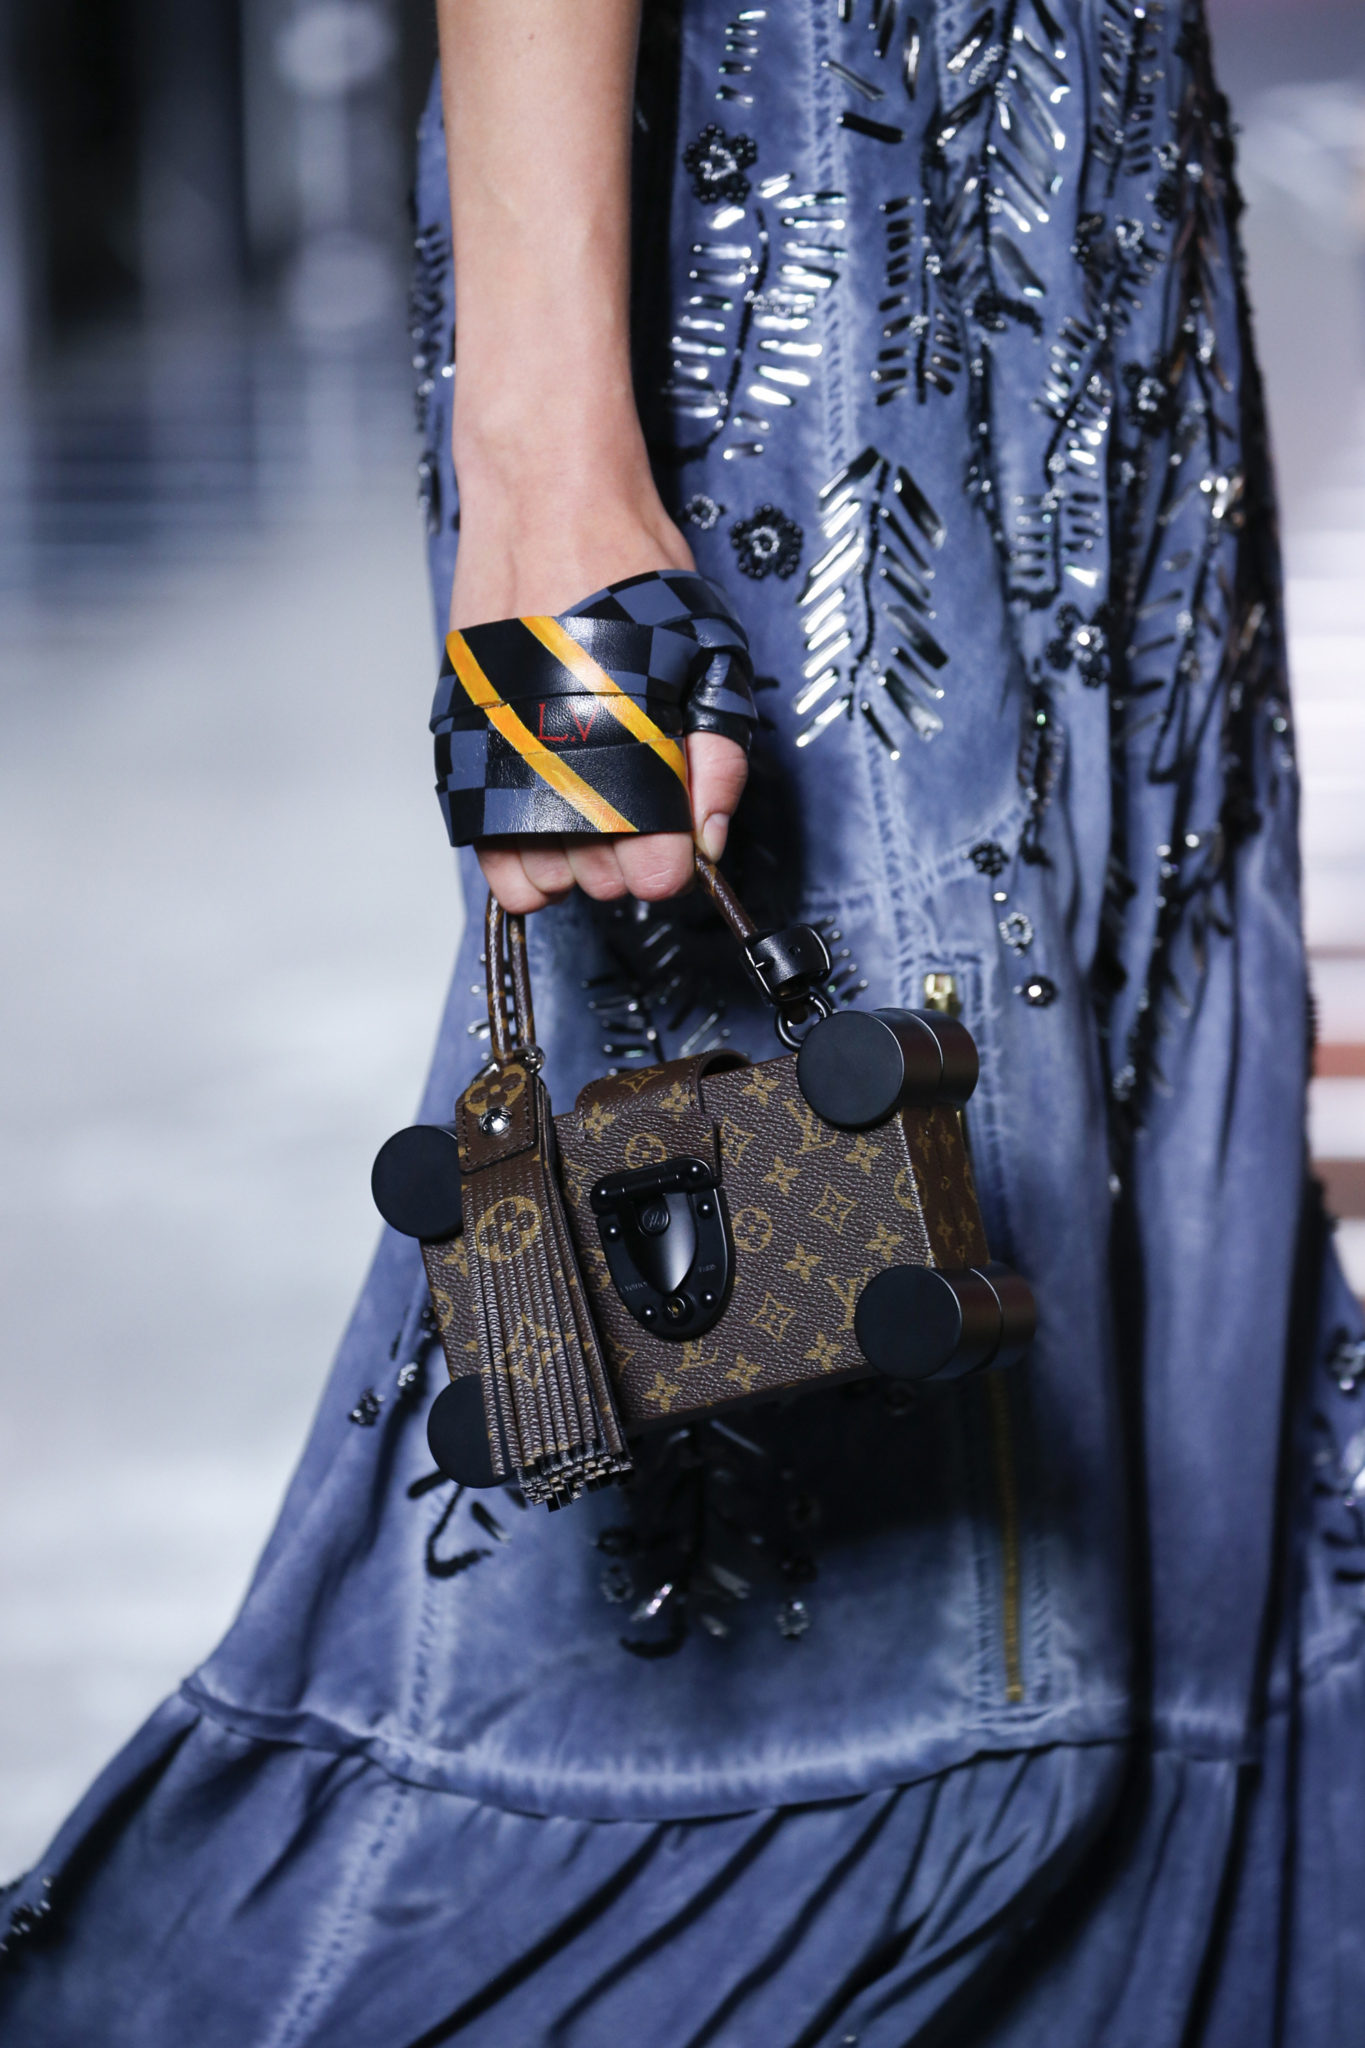 A Beginner's Guide To Investing In Vintage Louis Vuitton Handbags